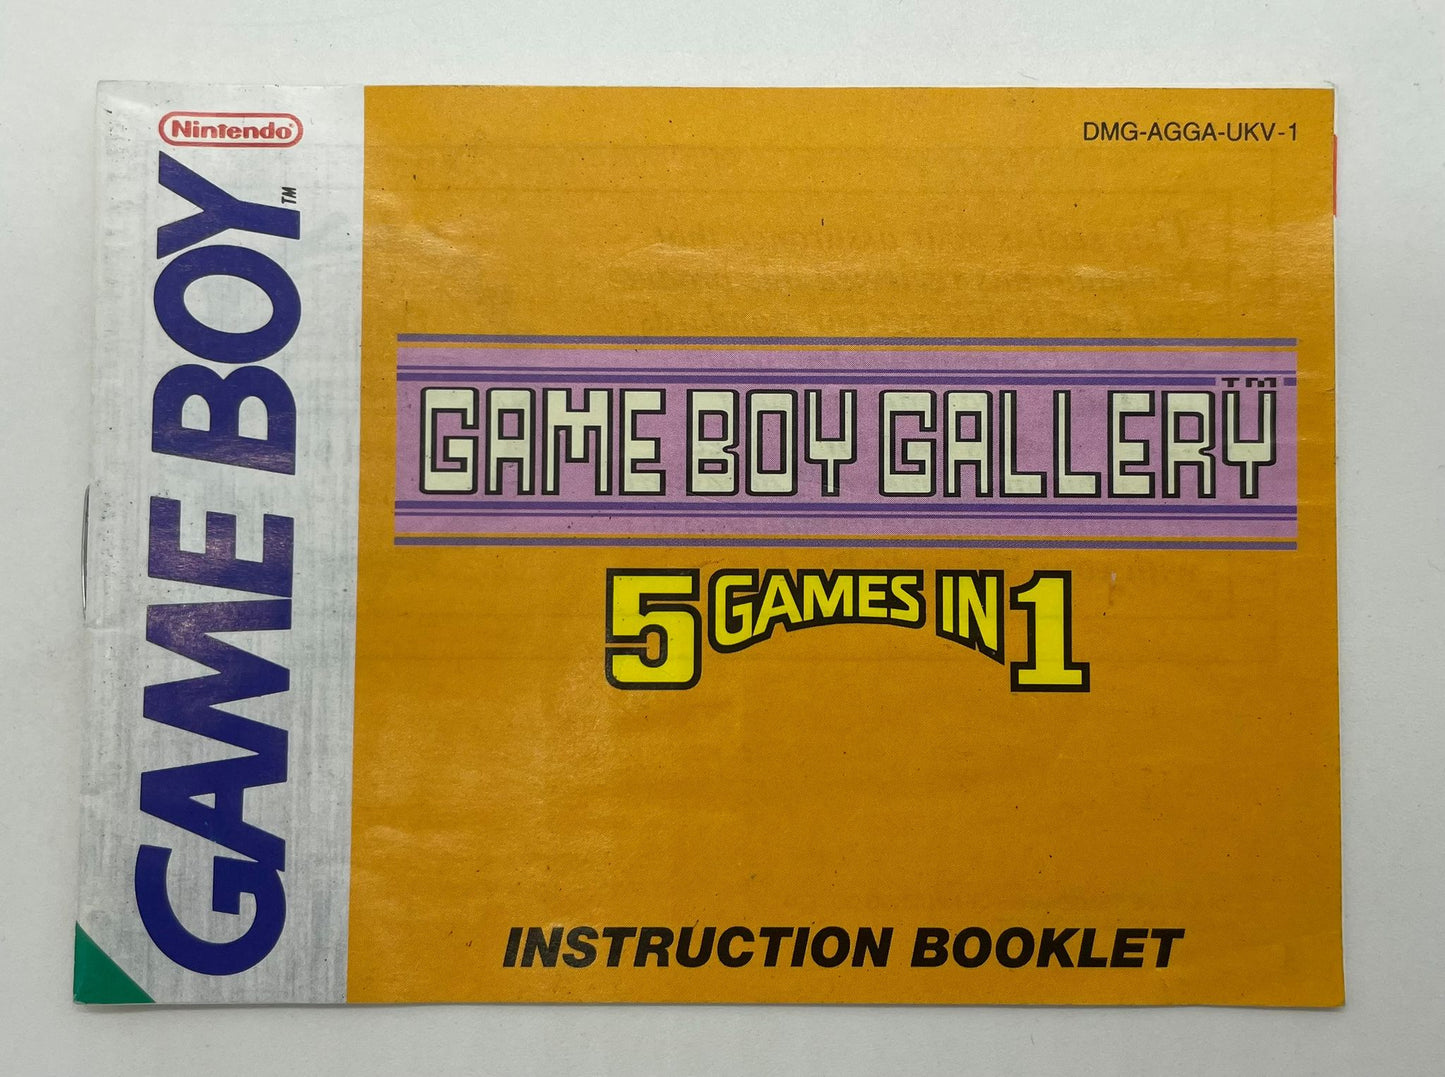 Game Boy Gallery 5 Games in 1 Anleitung